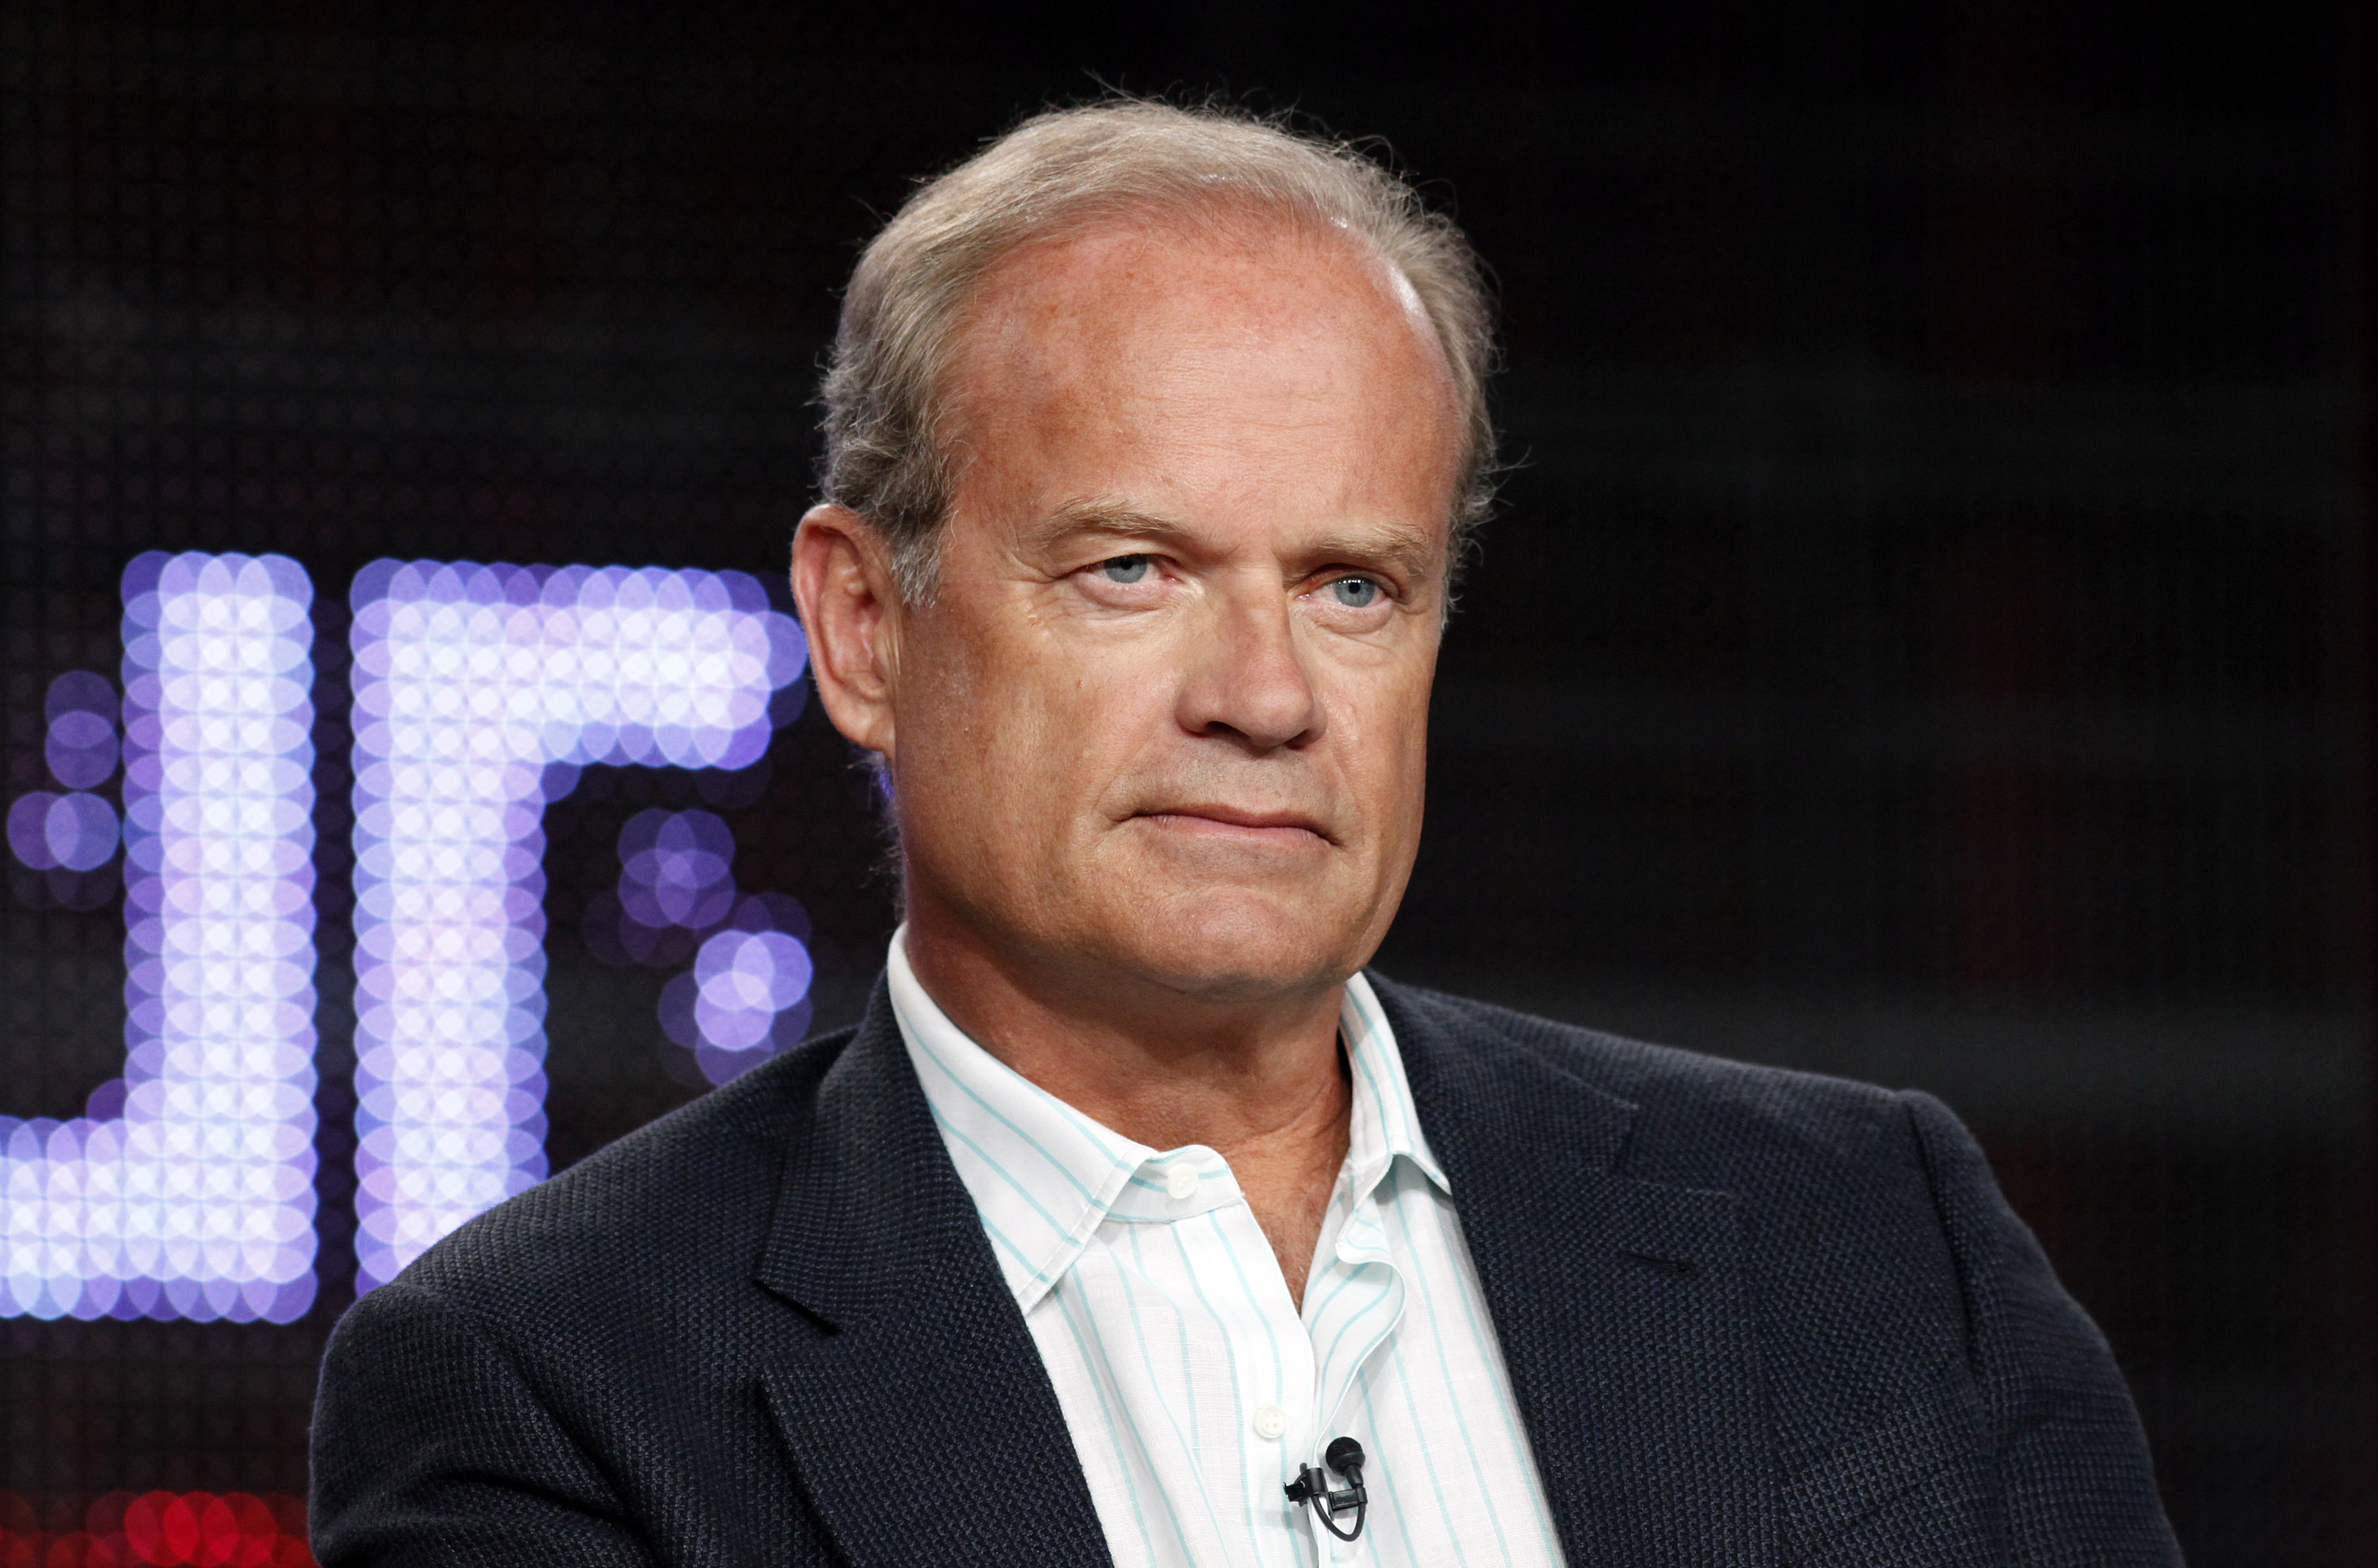 Kelsey Grammer at the "Summer Press Tour" Panel Event on August 8, 2009, in Pasadena, California | Source: Getty Images